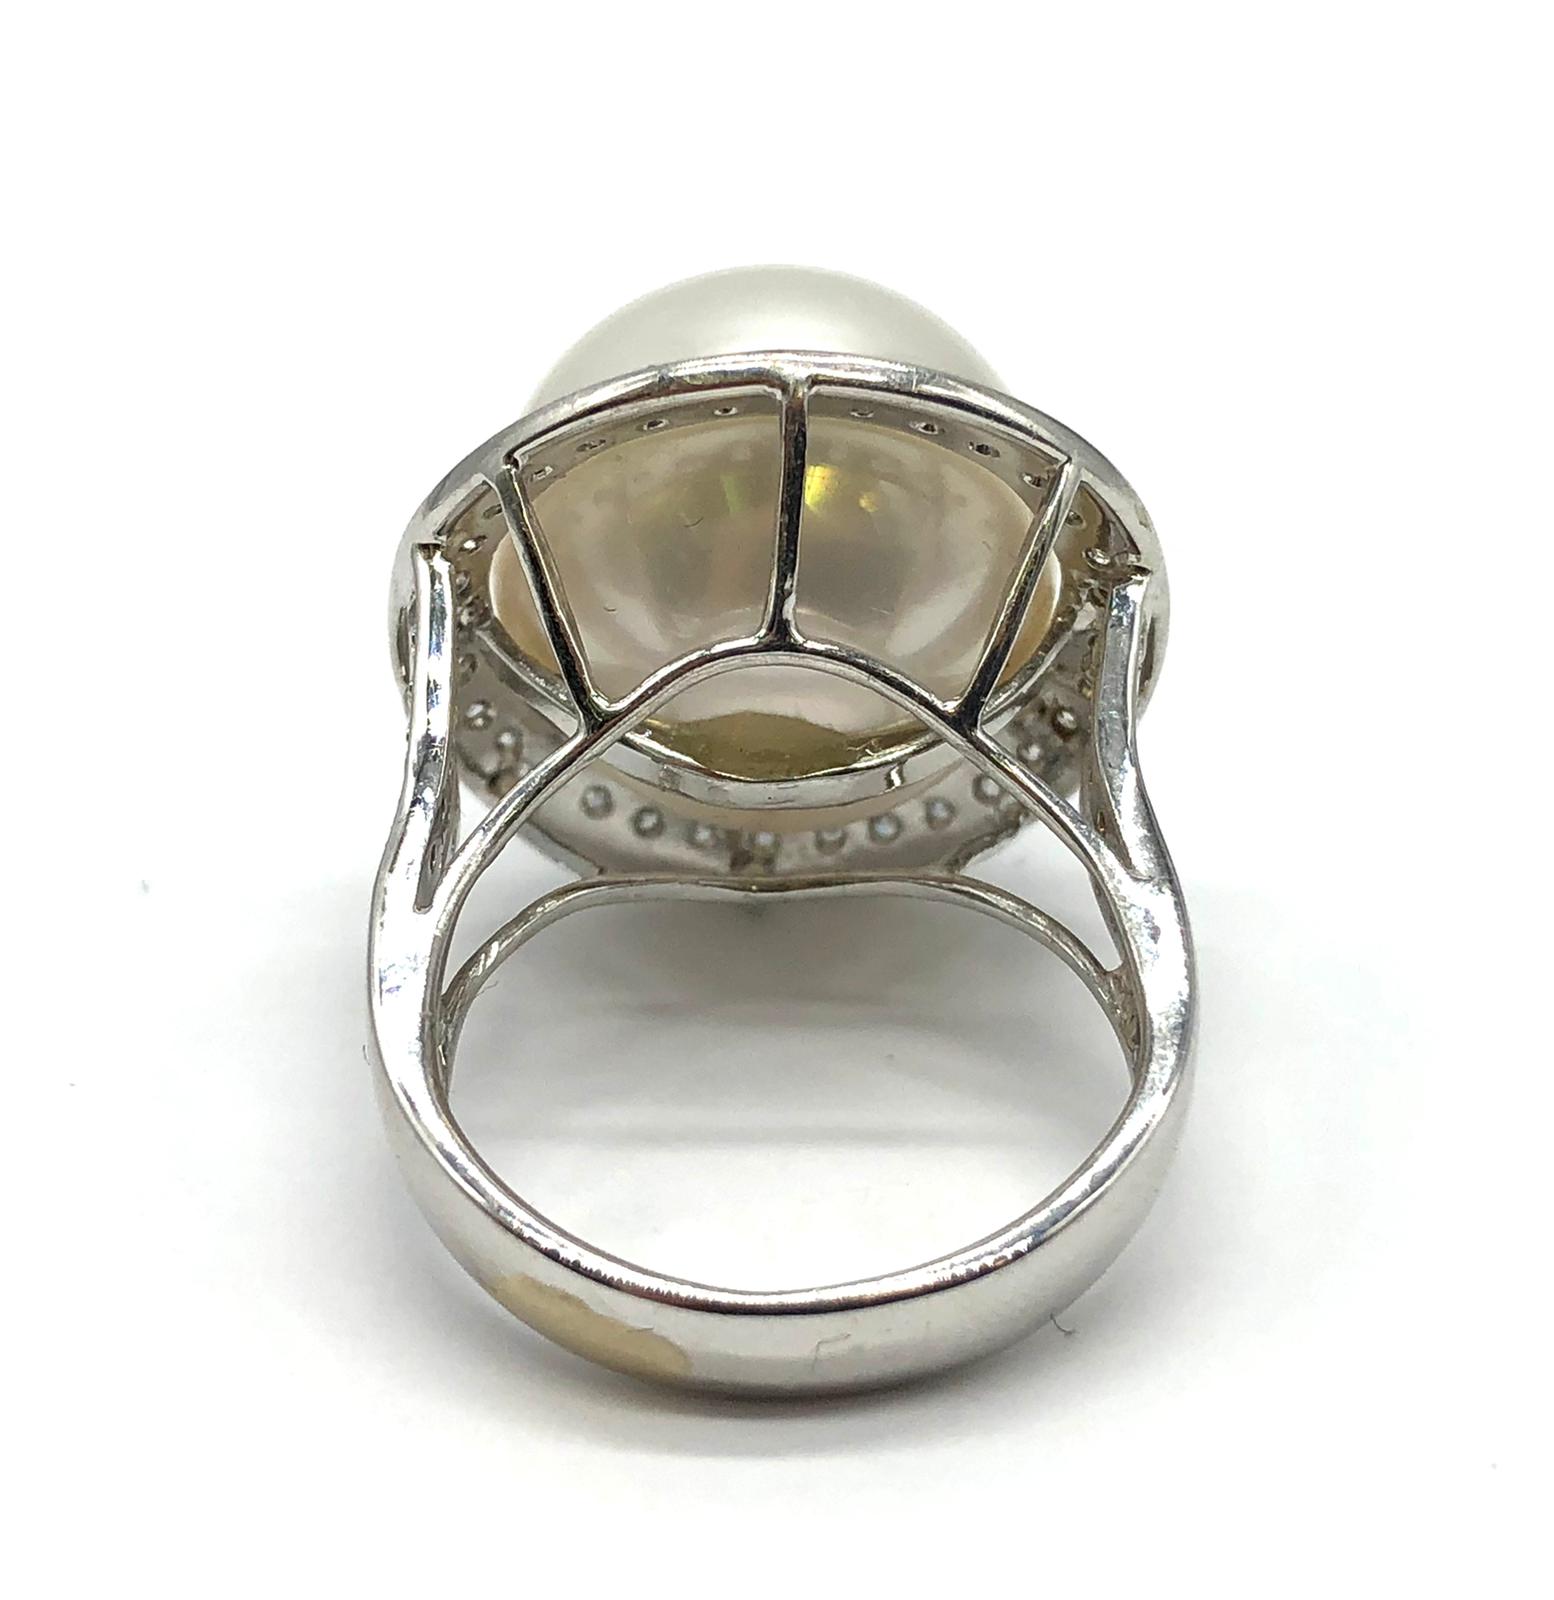 A large Kimoto pearl (17mm diameter) ring set in diamond and 18ct white gold ring, weight 14.43g and - Image 5 of 13